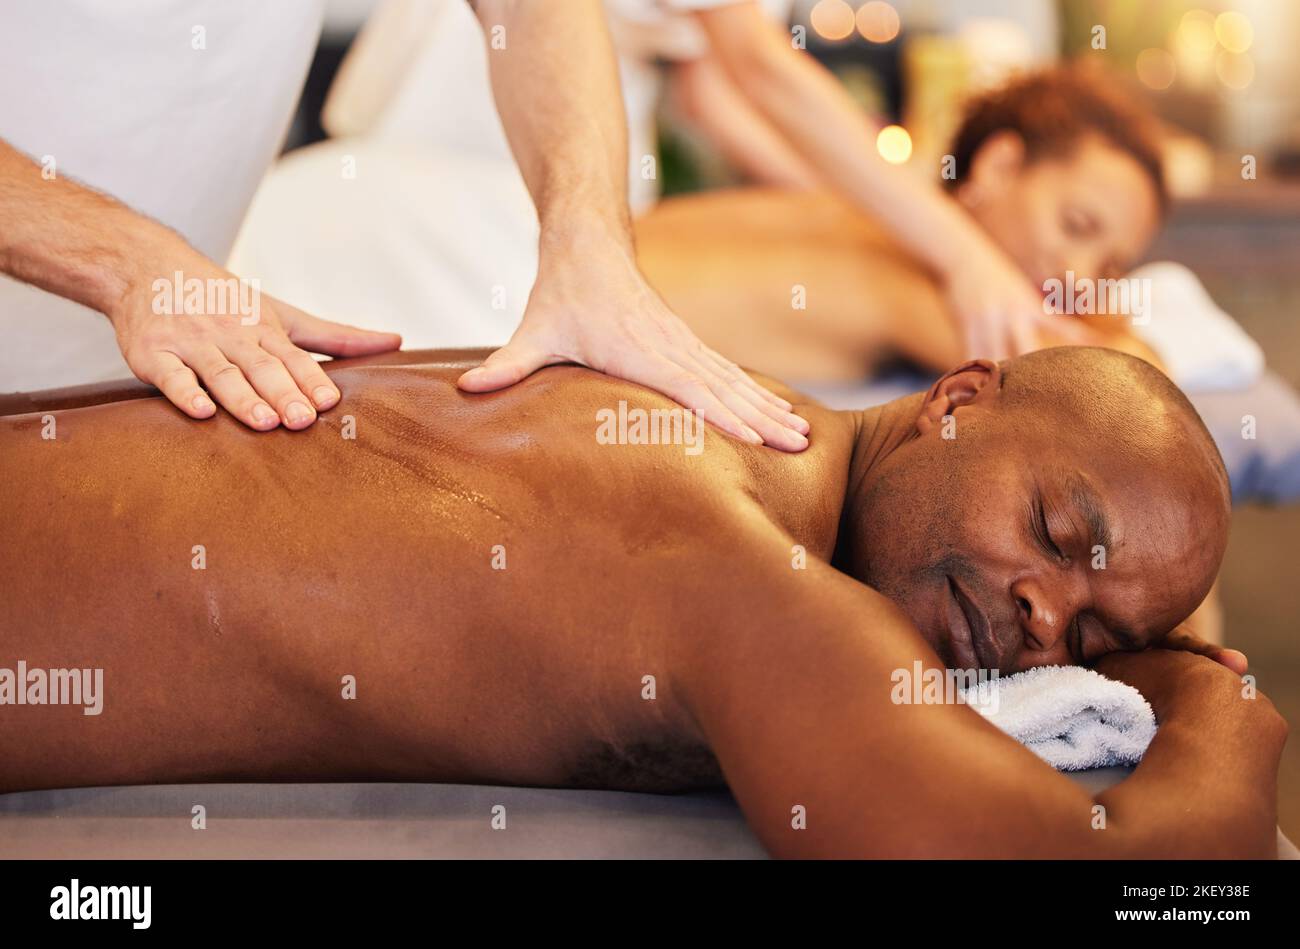 https://c8.alamy.com/comp/2KEY38E/skincare-massage-and-physiotherapy-hands-for-zen-couple-in-spa-for-wellness-relax-or-health-salon-luxury-and-black-man-and-woman-enjoy-treatment-2KEY38E.jpg